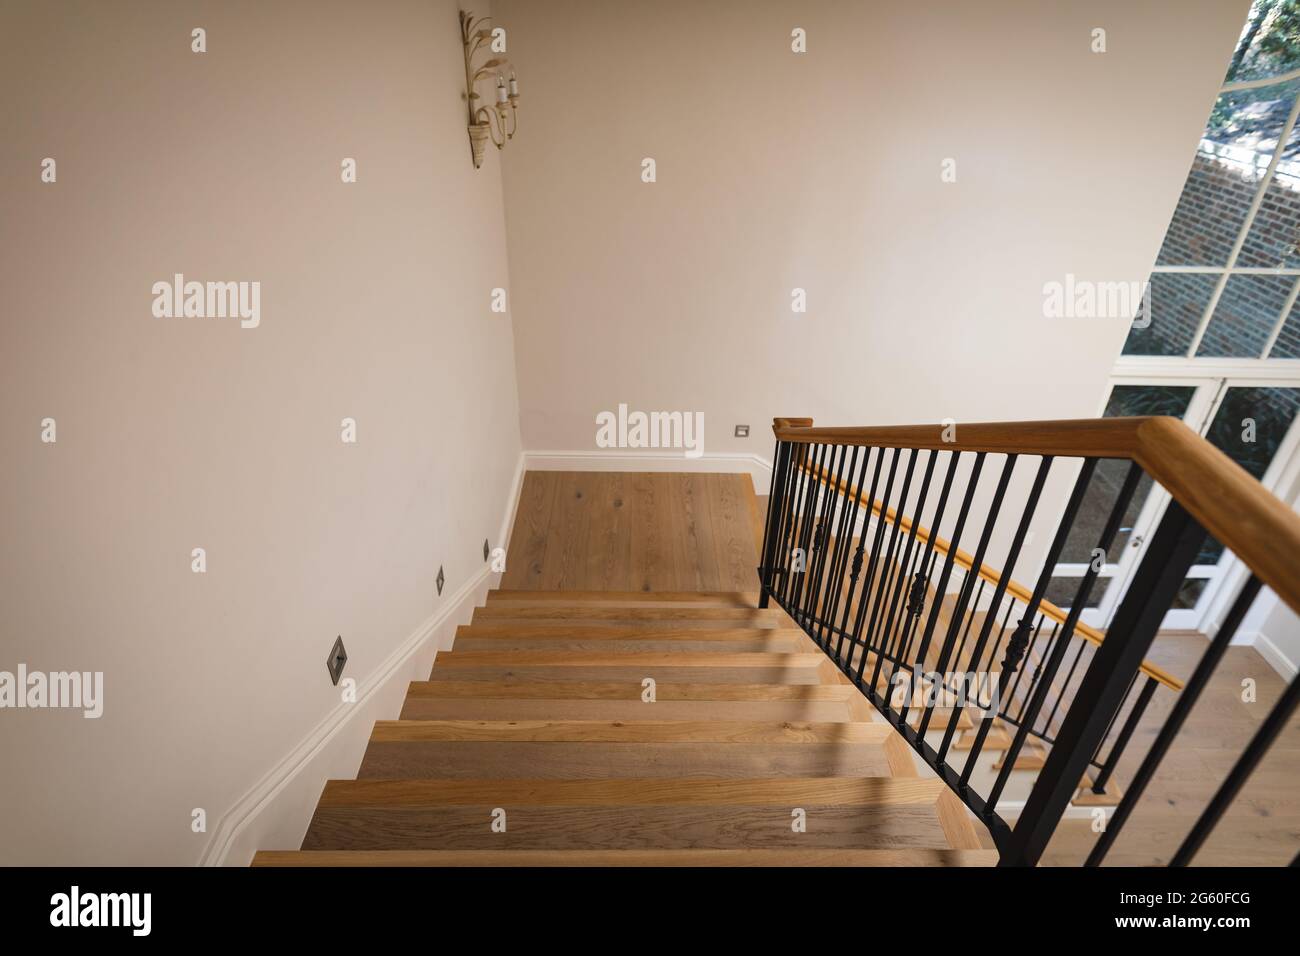 General view of house interior with i spacious hallway and staircase Stock Photo